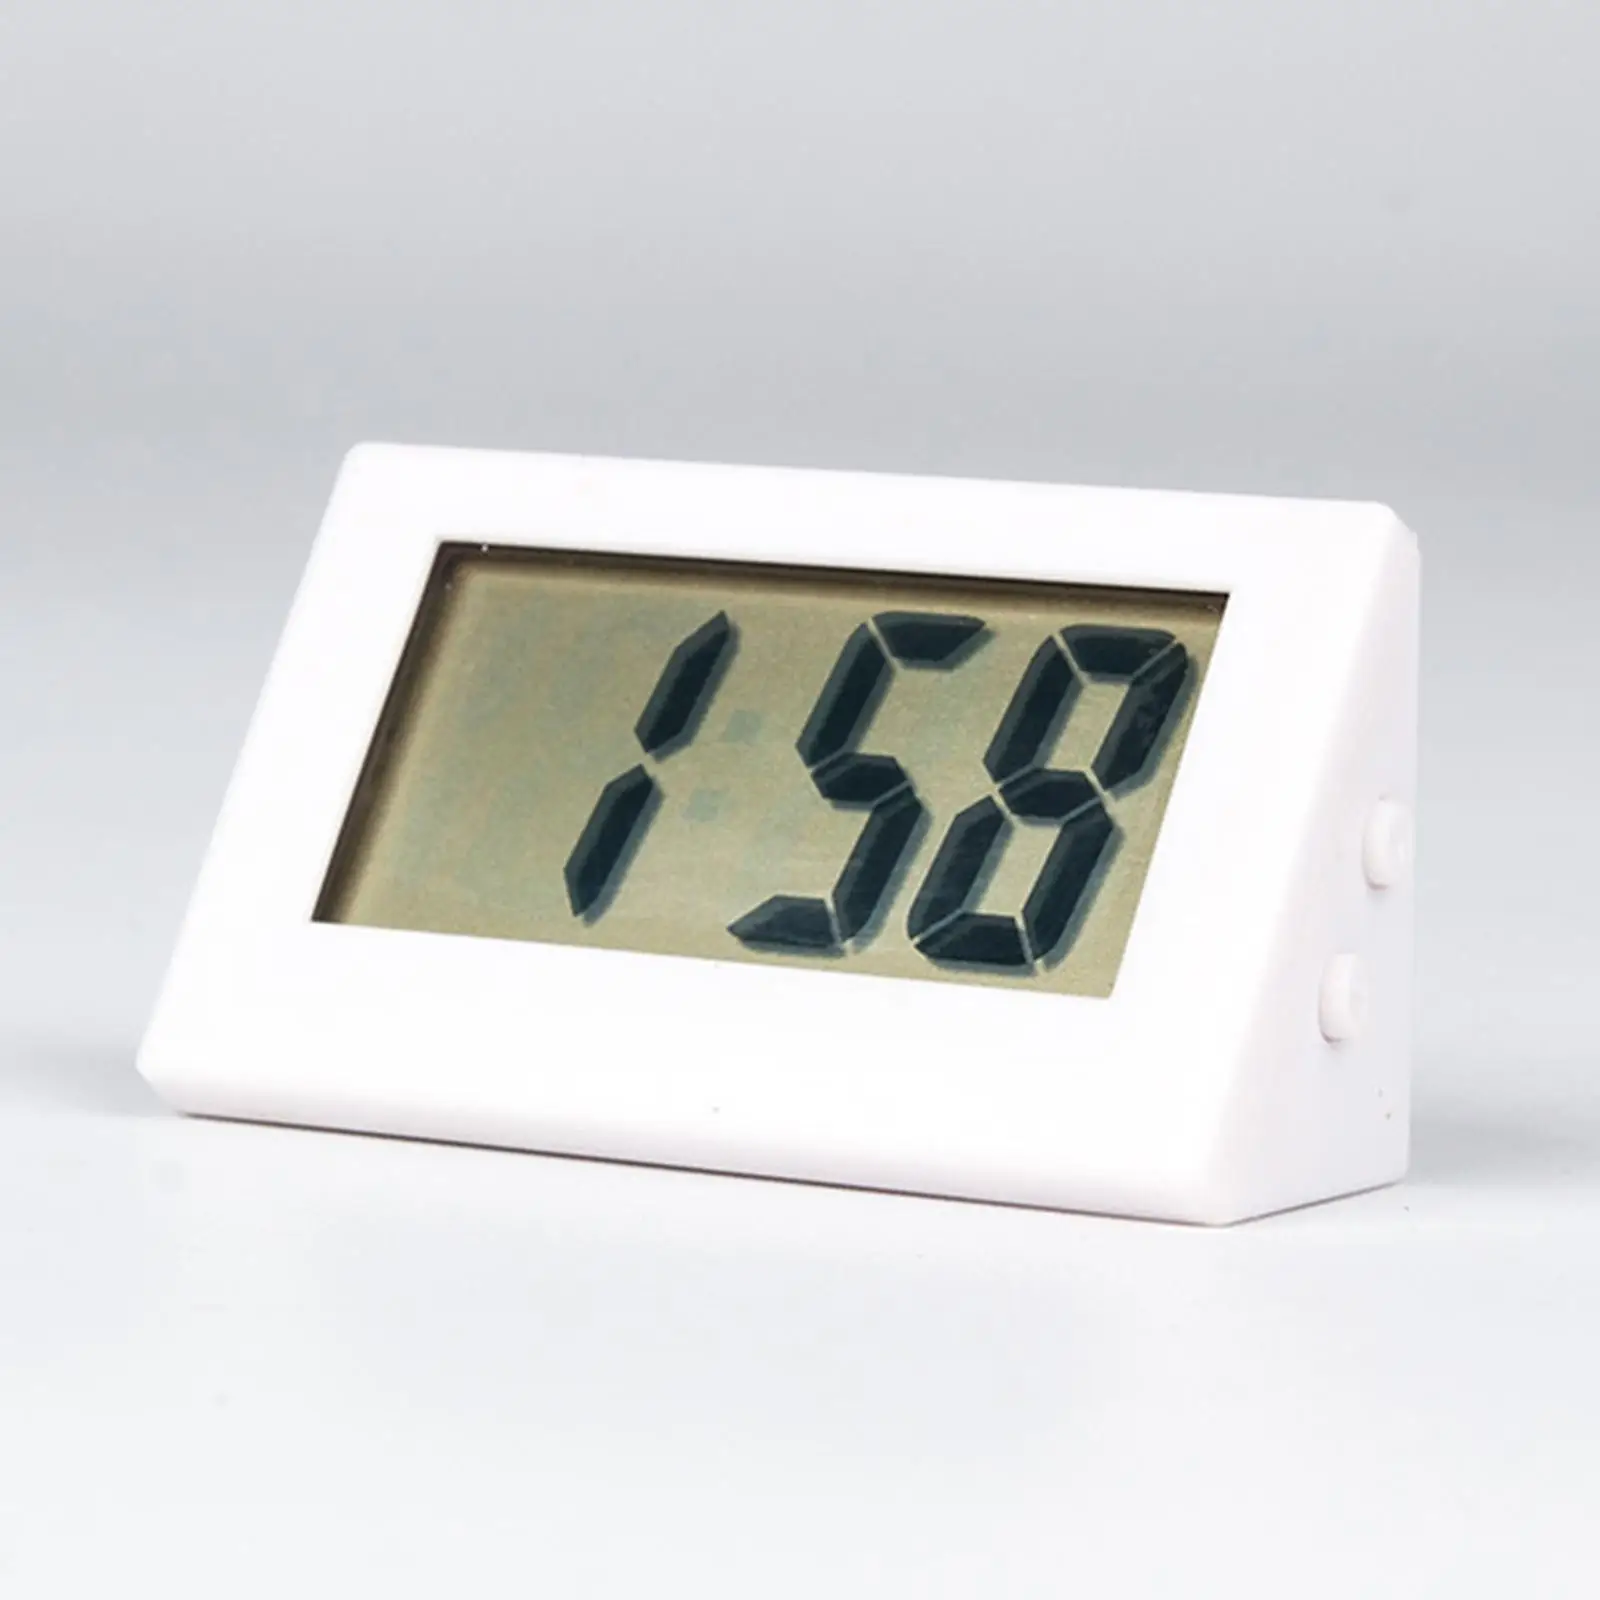 Table Clock LCD Display Mute Mode Standing Numeral for Various Occasions Home Desktop decor Kitchen Study